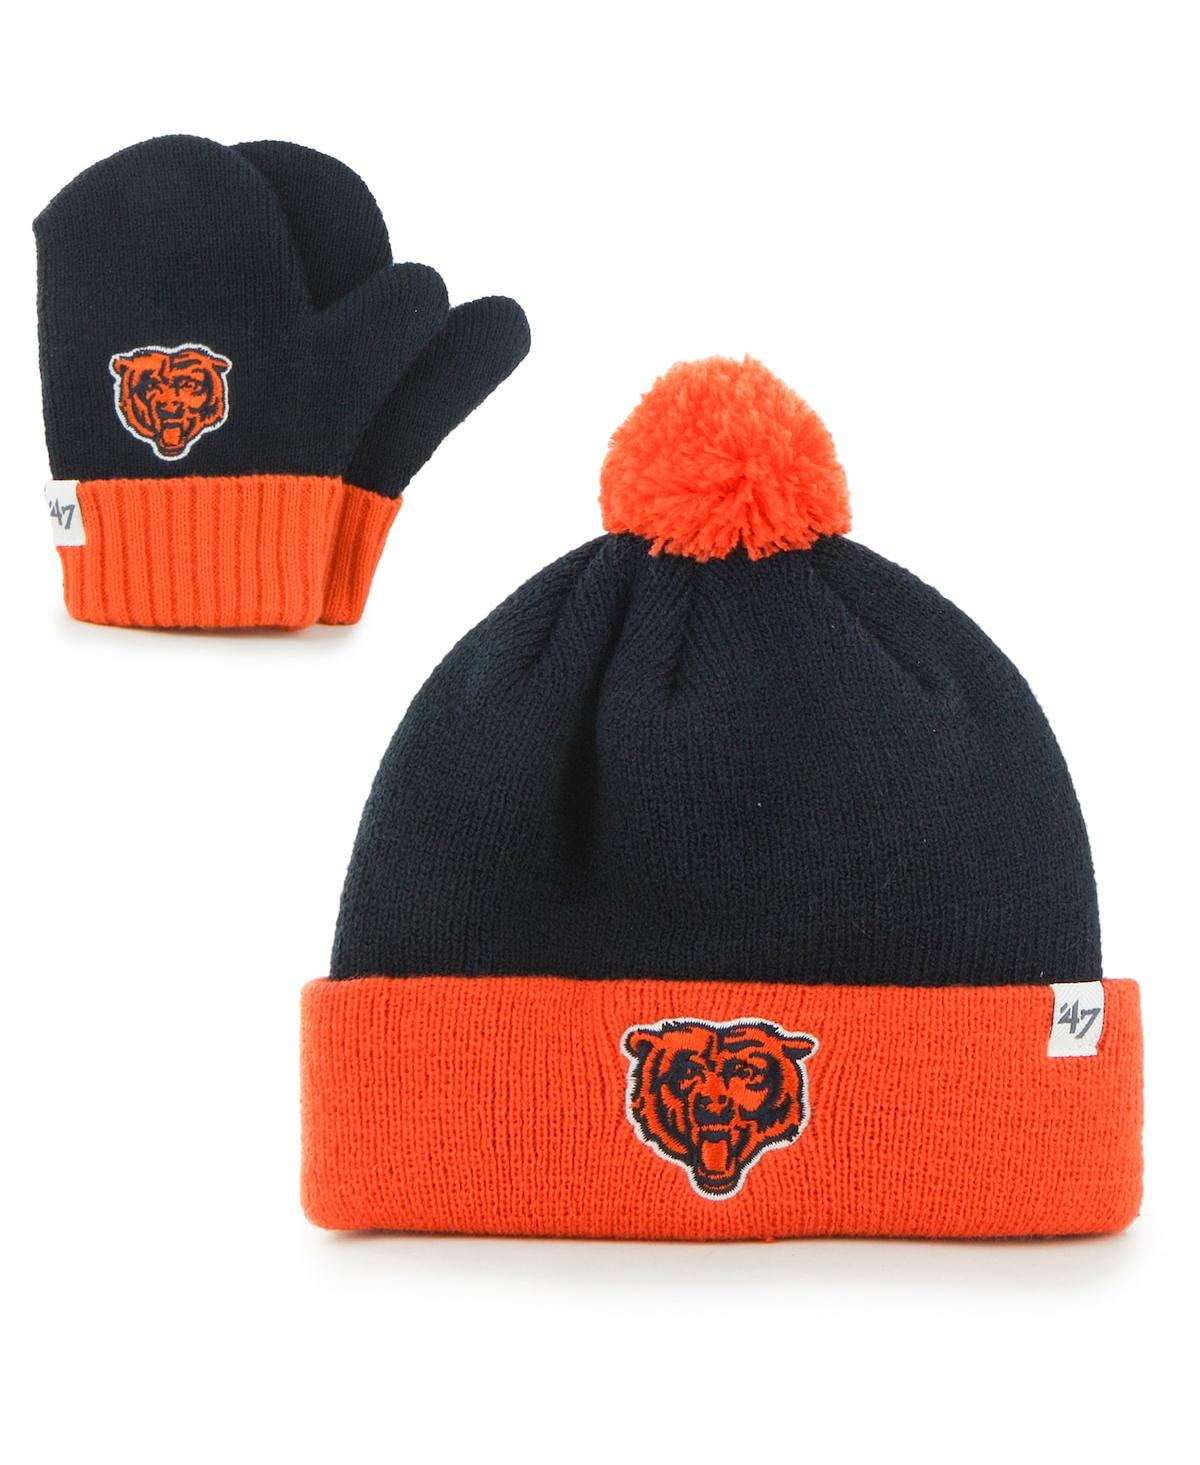 47 Brand Babies' Toddler Unisex Navy And Orange Chicago Bears Bam Bam Cuffed Knit Hat With Pom And Mittens Set In Navy,orange